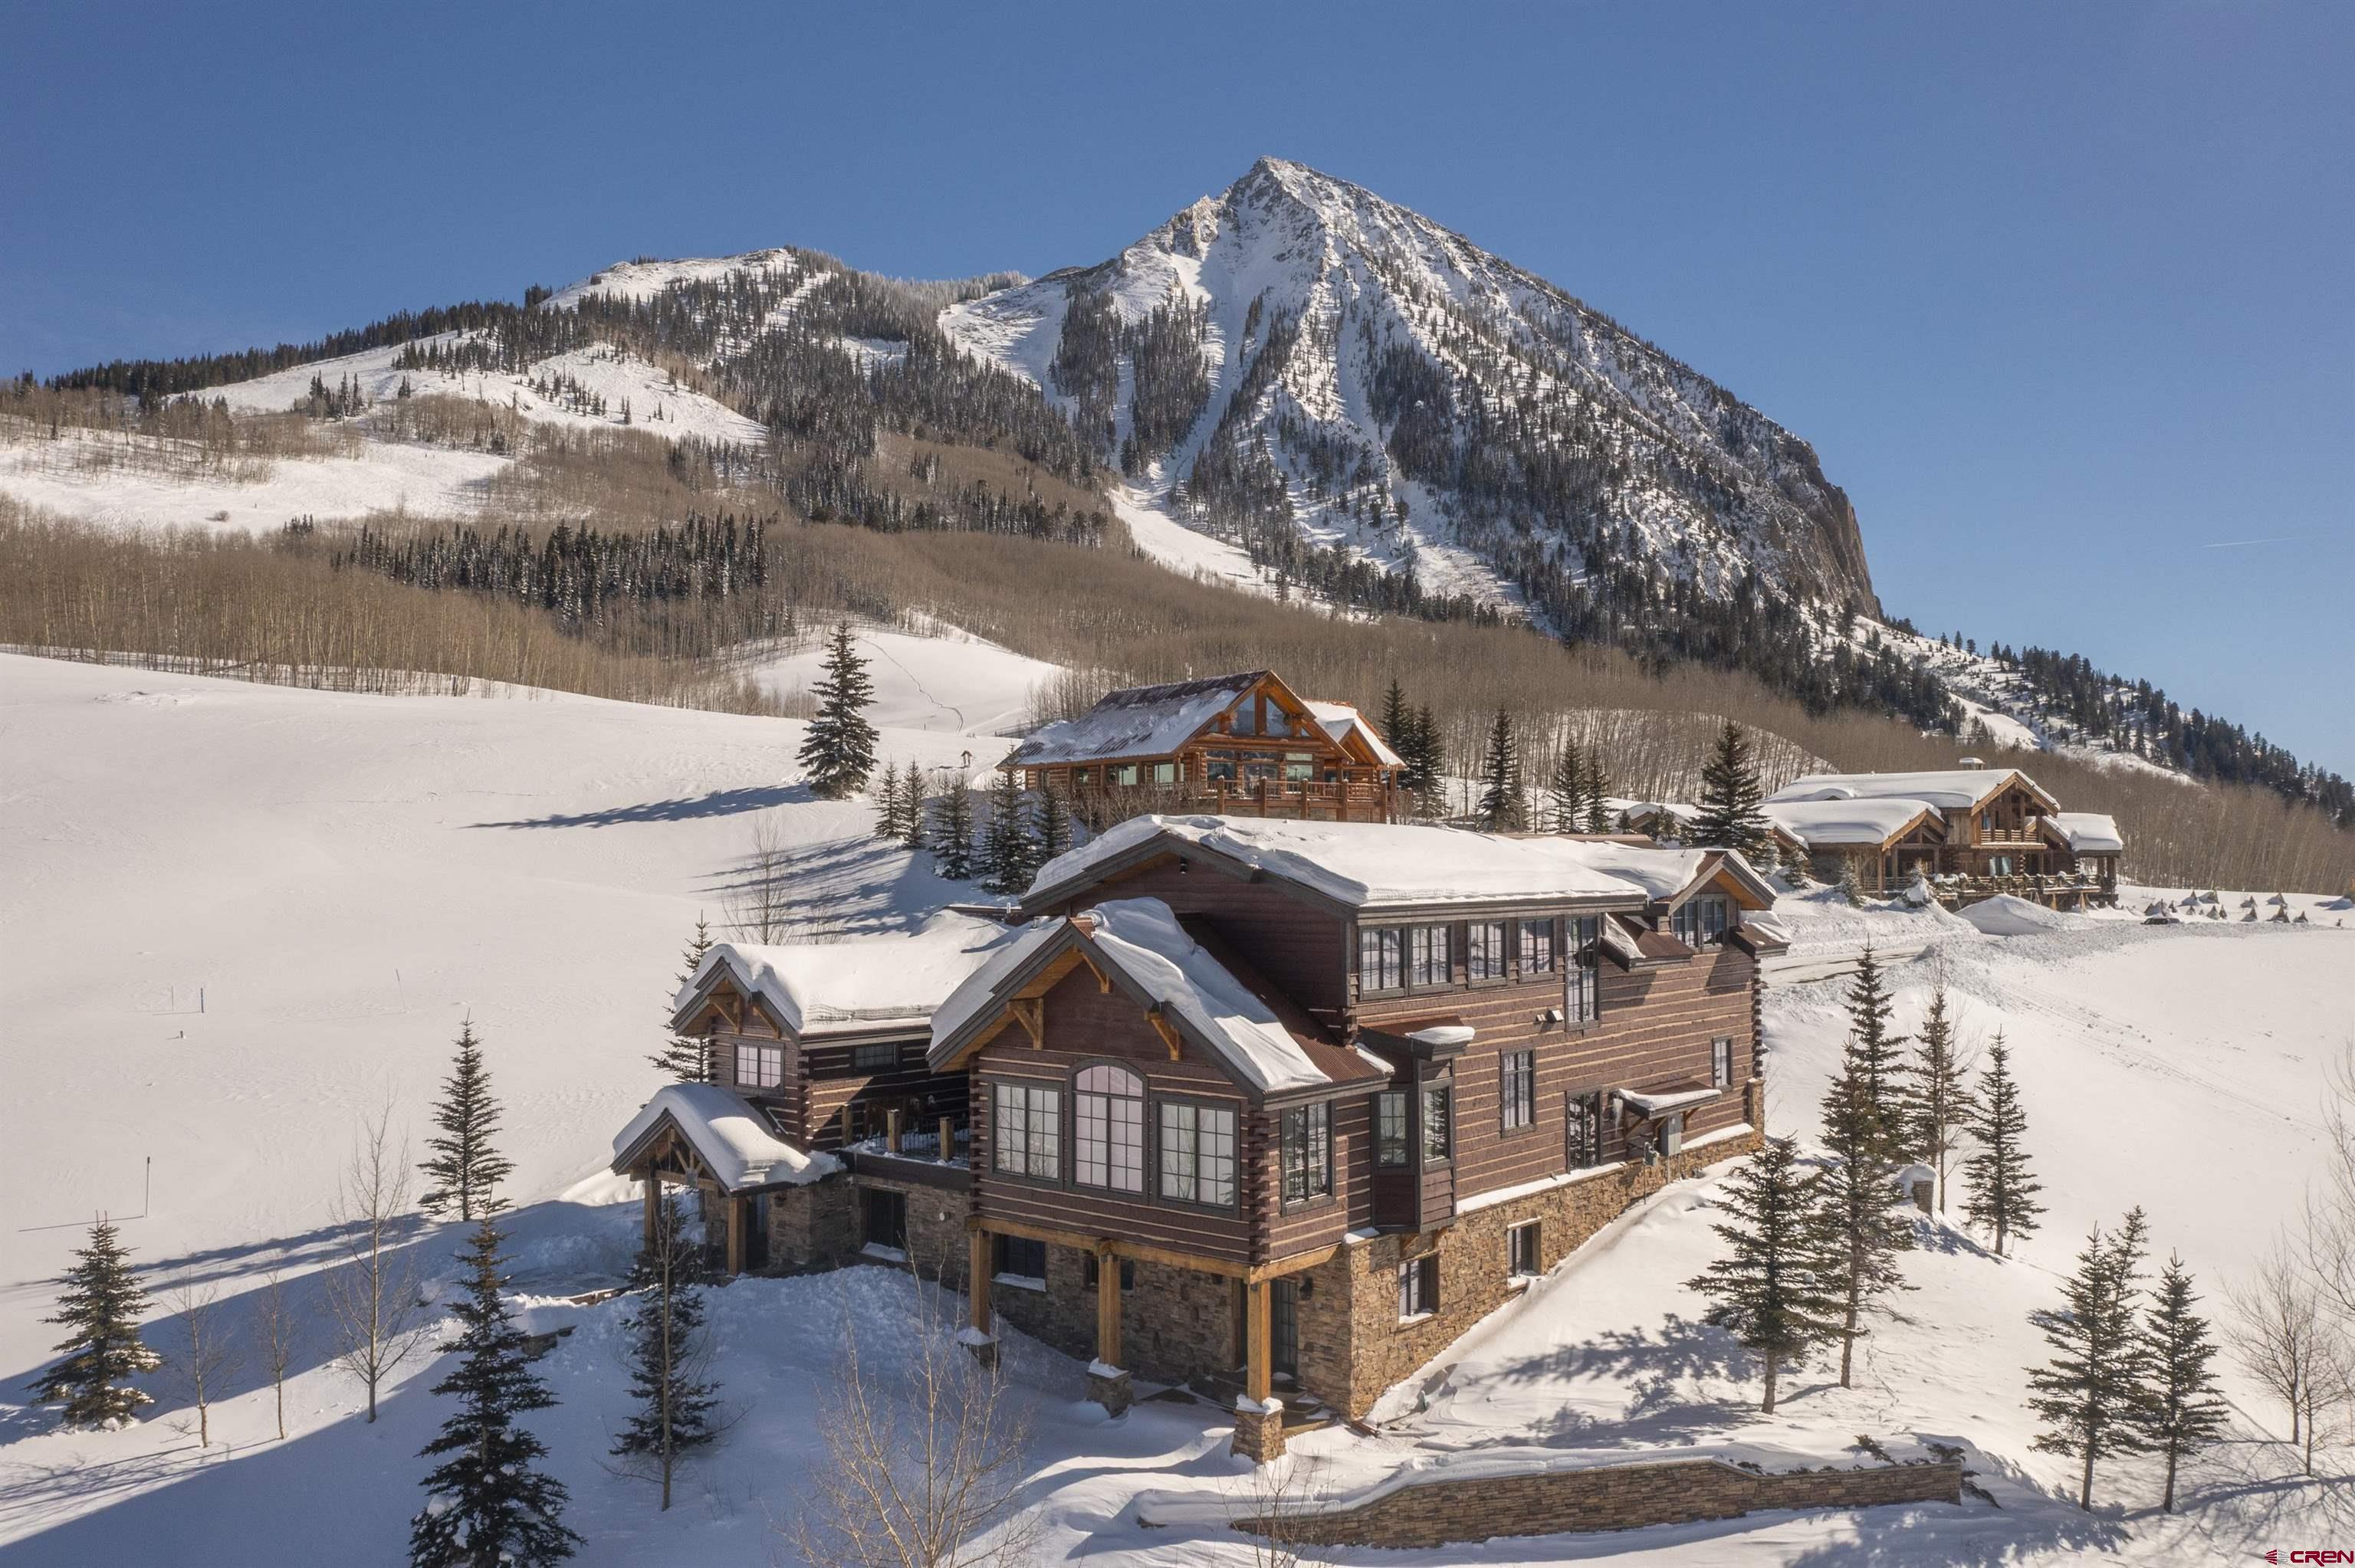 59 Summit Road, Mt. Crested Butte, CO 